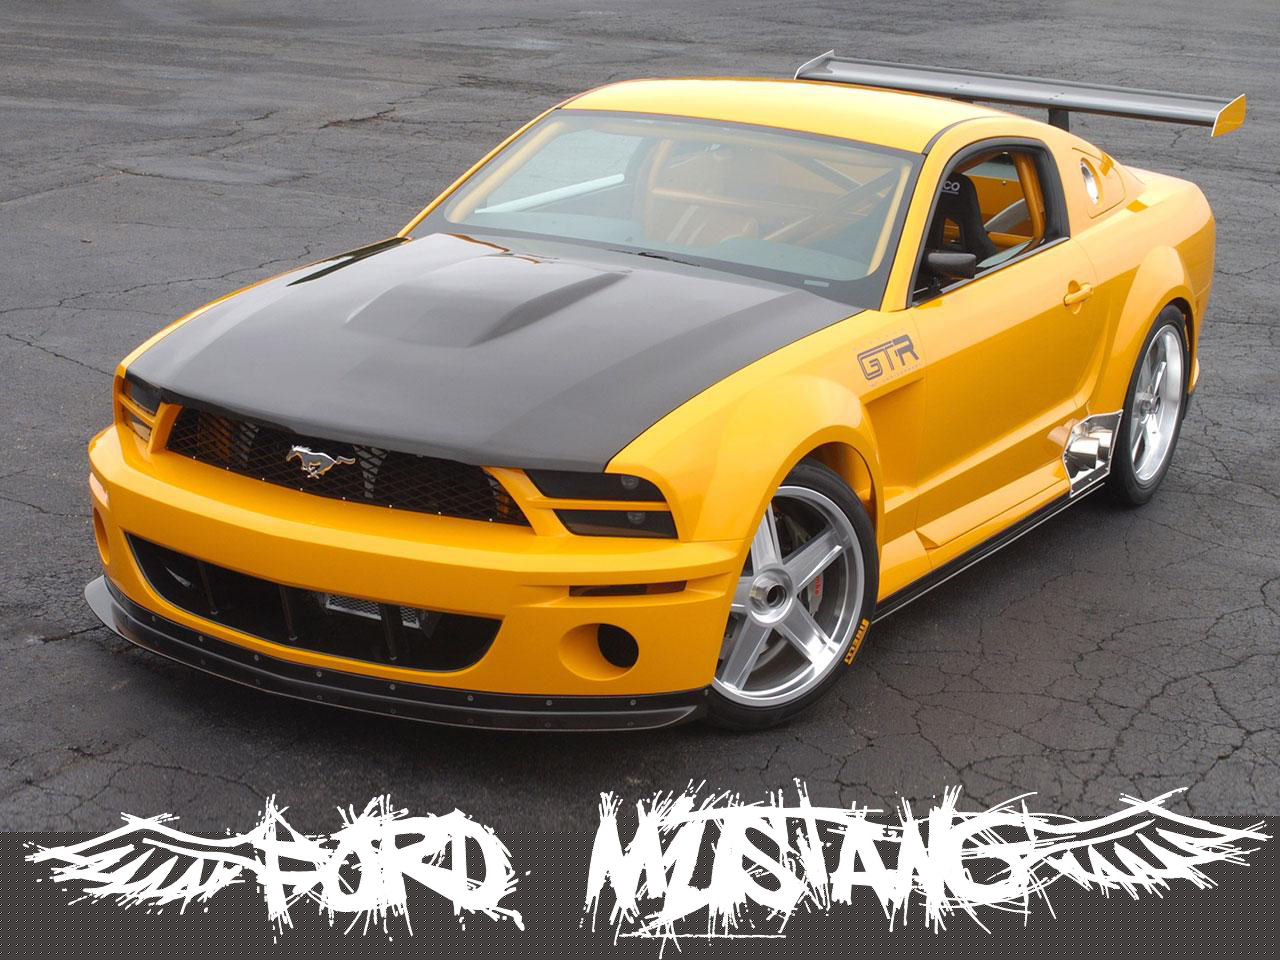 Auto Tuning1 - autos - ford mustang gt r concept 2005 auto tuning cars carros22232.jpg